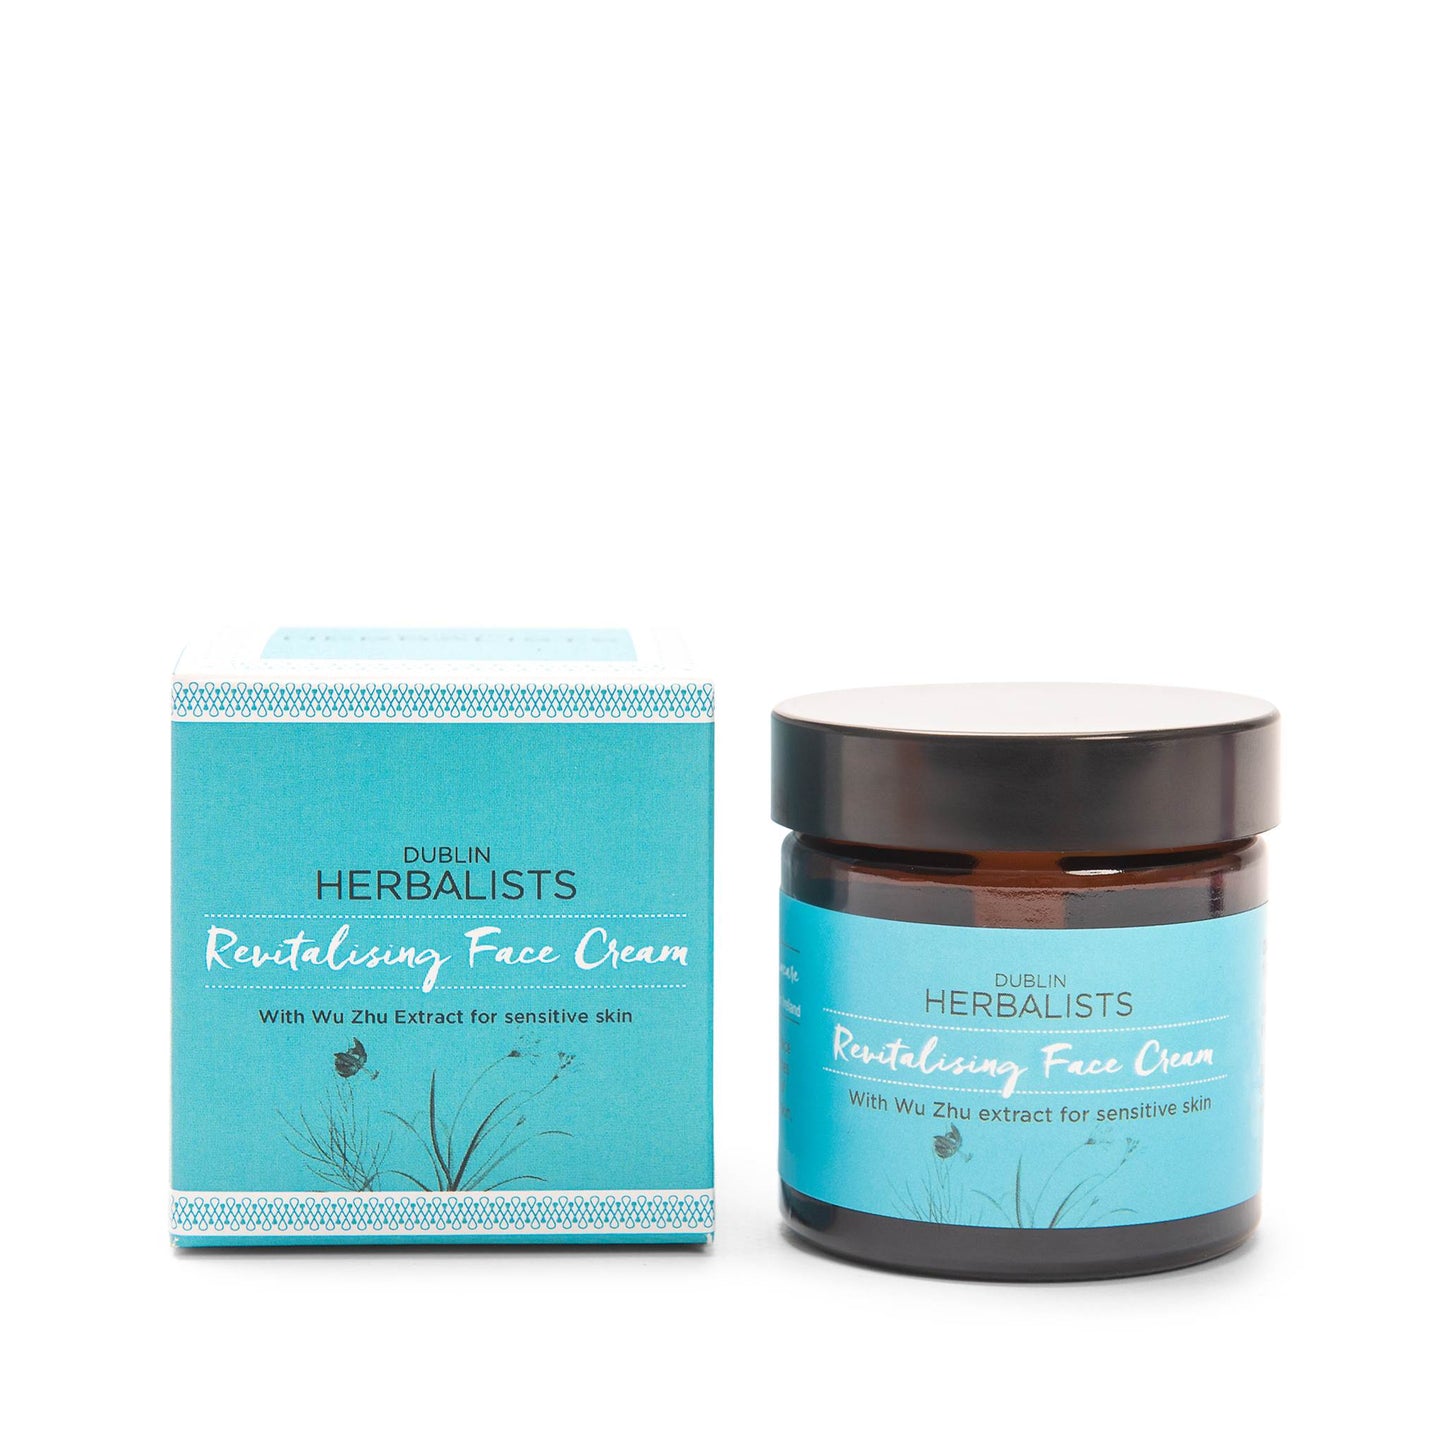 Dublin Herbalists Lotion & Moisturizer Revitalising Face Cream for Sensitive and Combination Skin - 60ml -  Dublin Herbalists